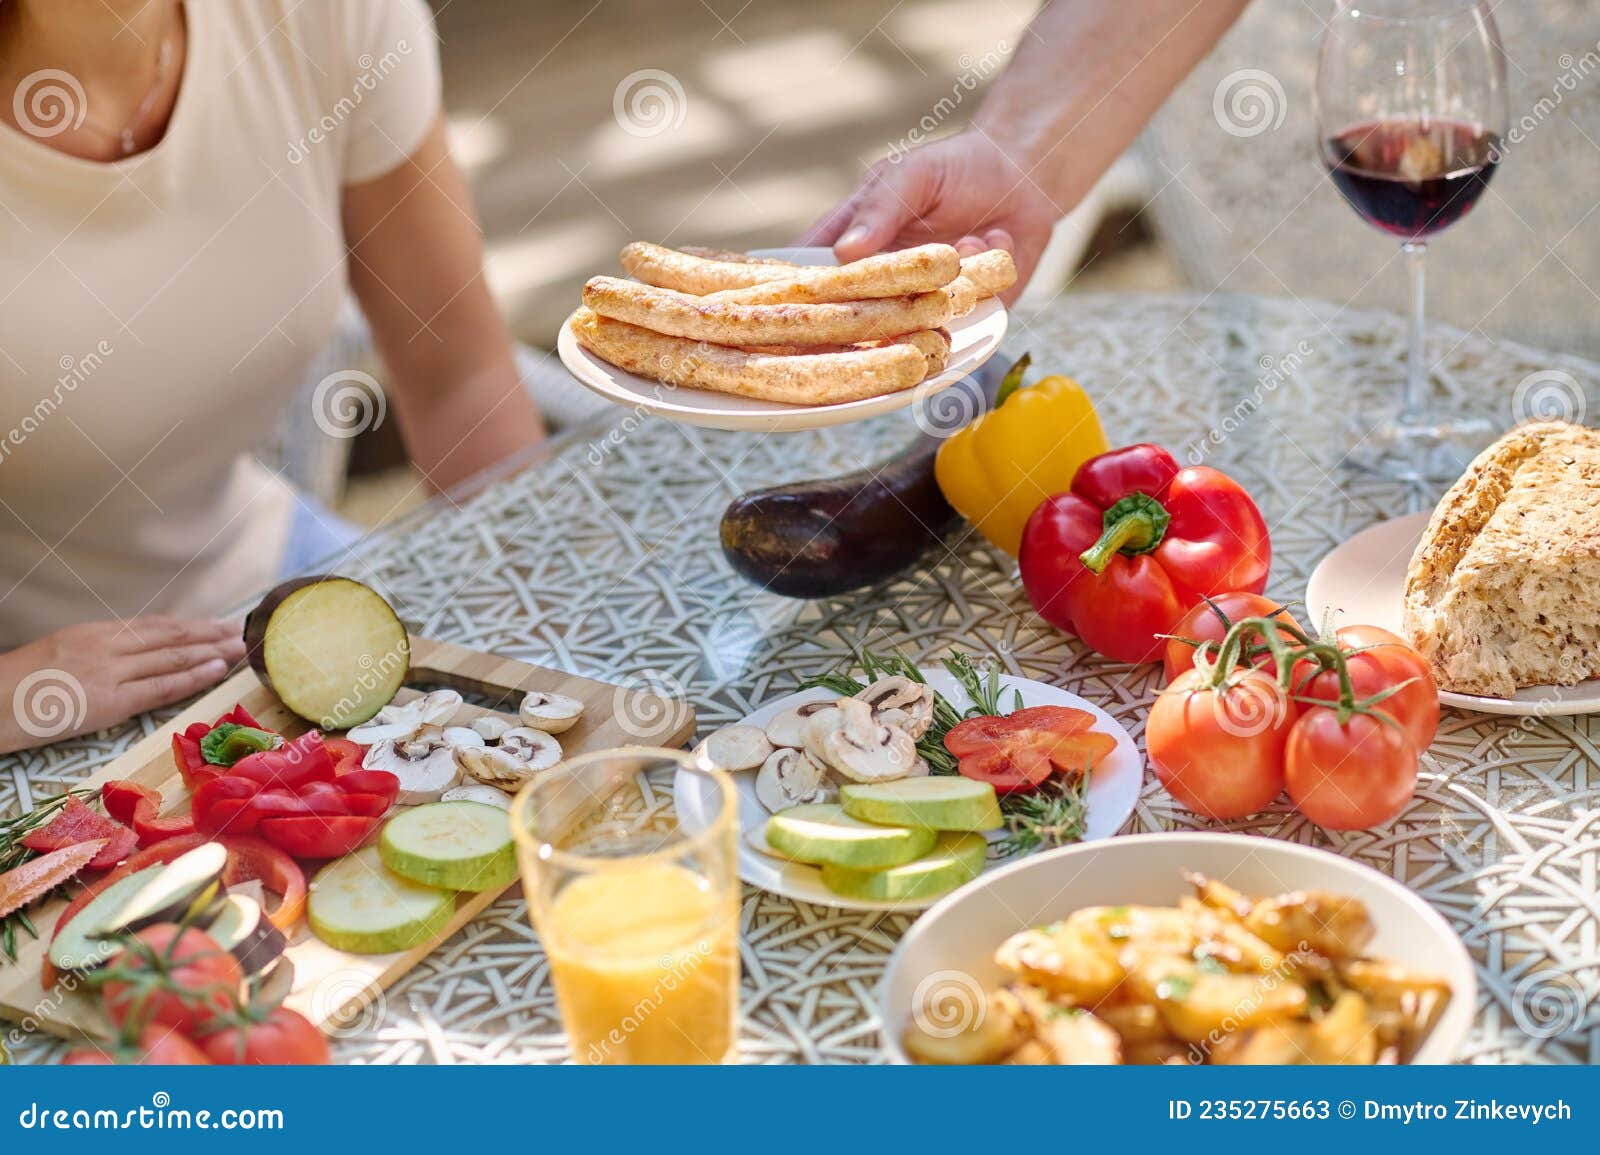 A Close of a Dinner Tables with Food on it Stock Image - Image of meal ...